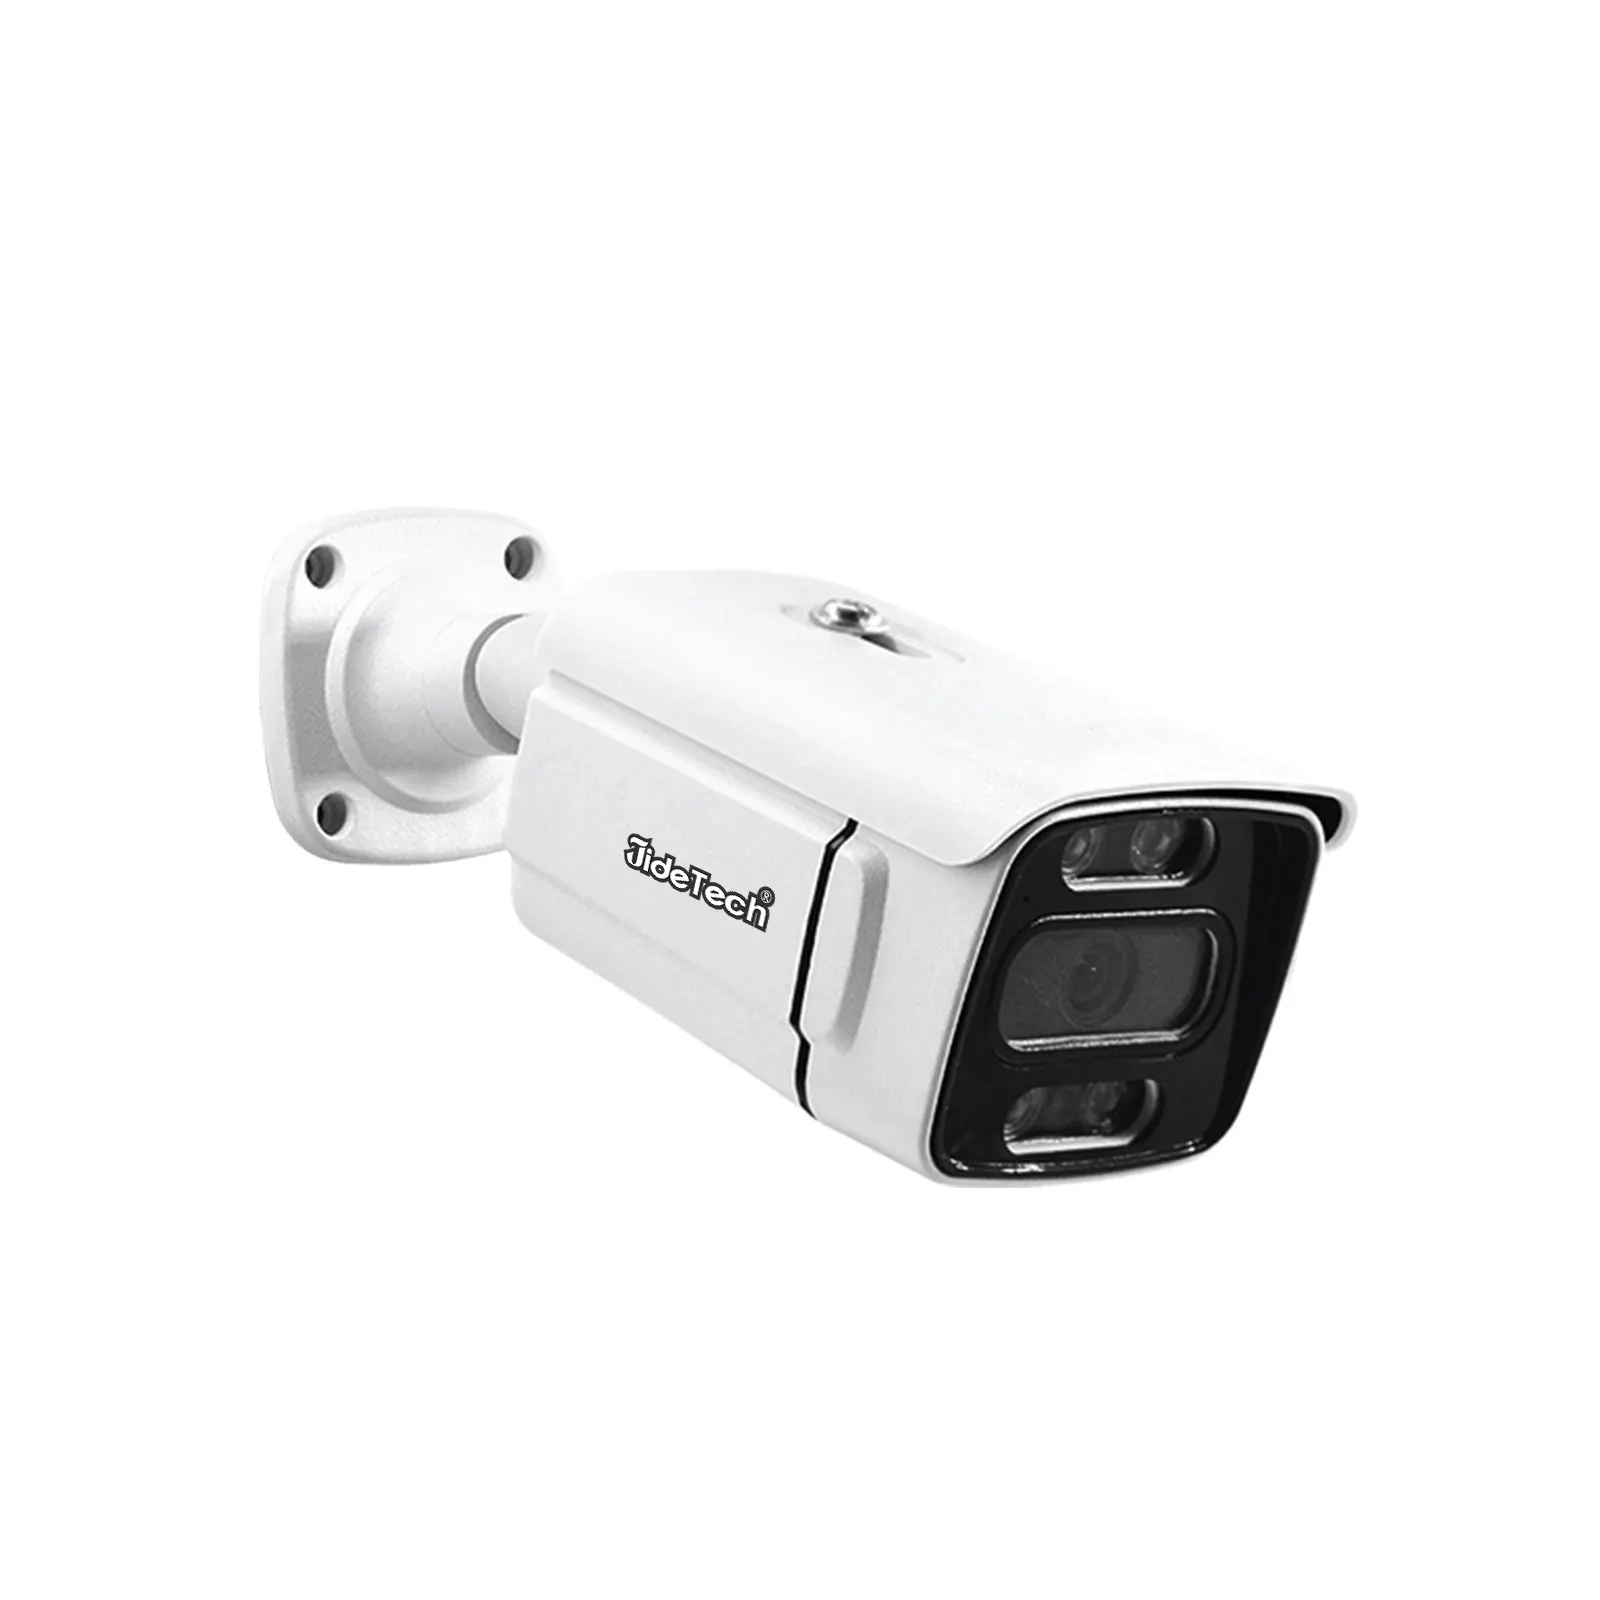 JideTech 5MP HD CCTV Surveillance Camera Outdoor Security Camera Video Network IP Camera Support Two Way Audio